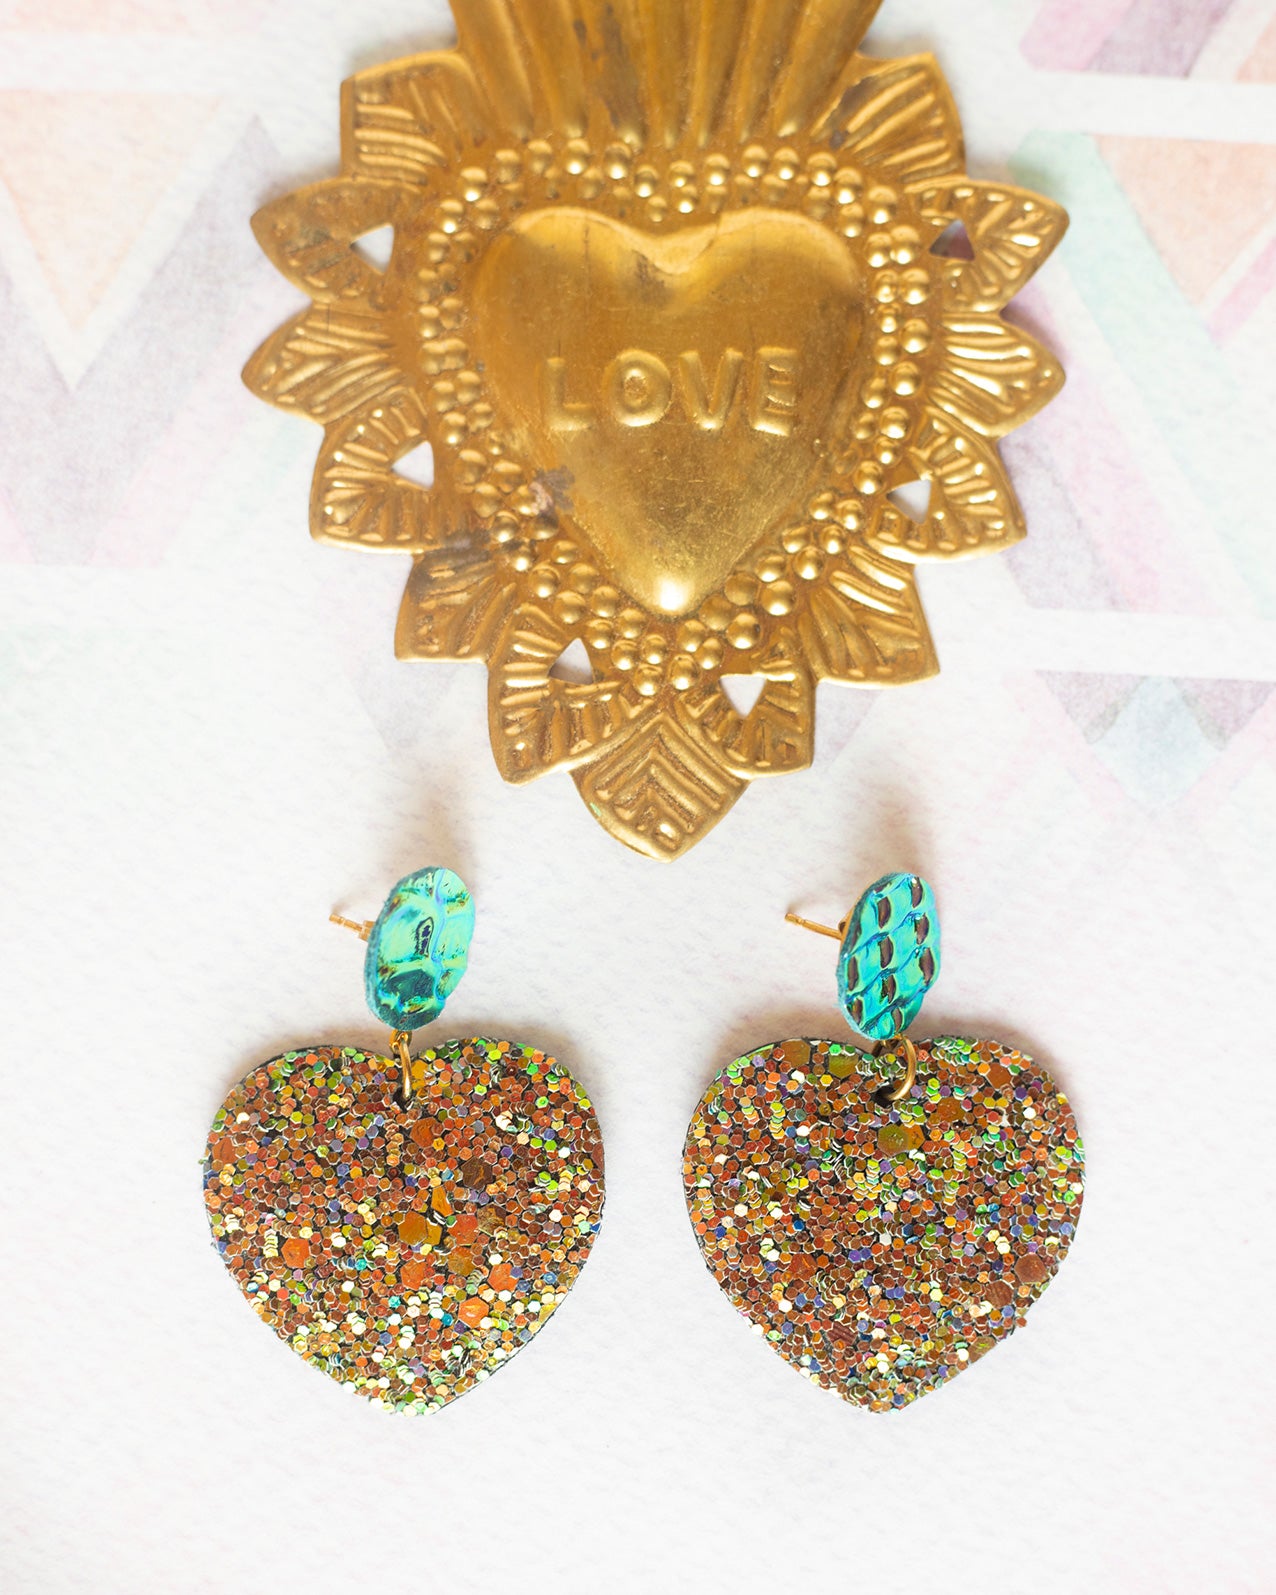 Heart earrings - holographic leather and glitter